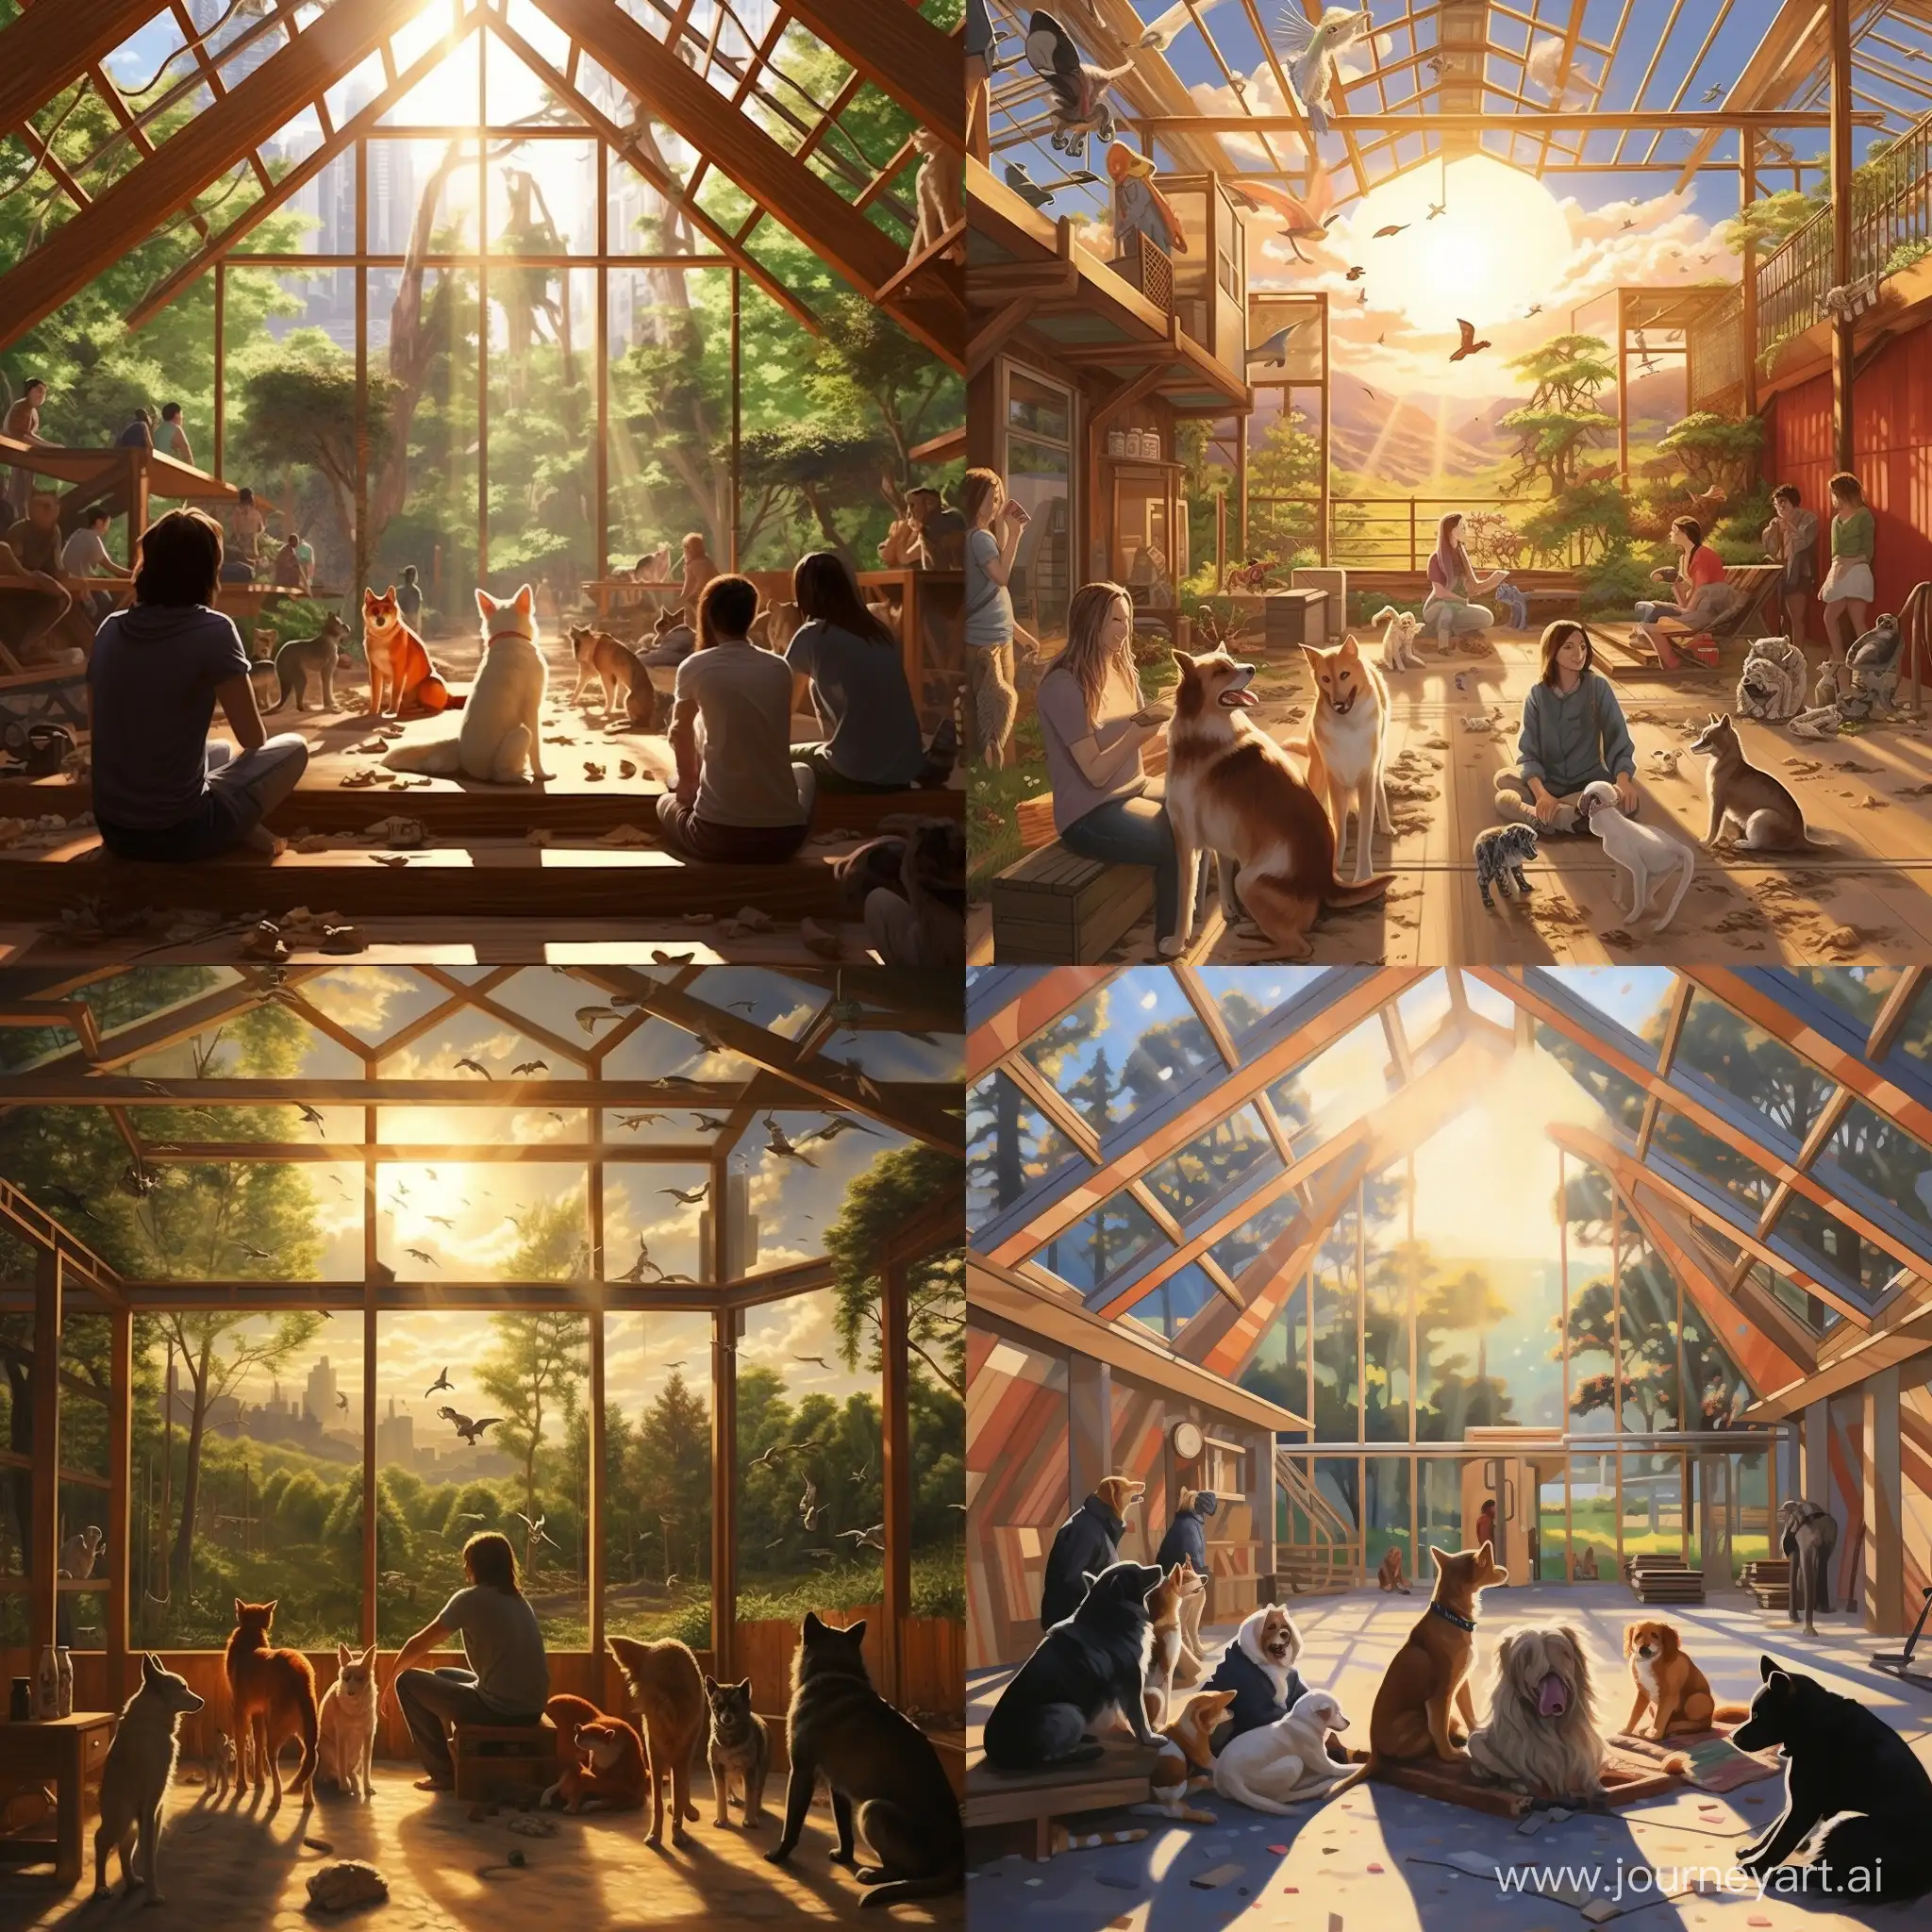 animal shelter, dogs, cats, people, training, wood construction, trees, sun